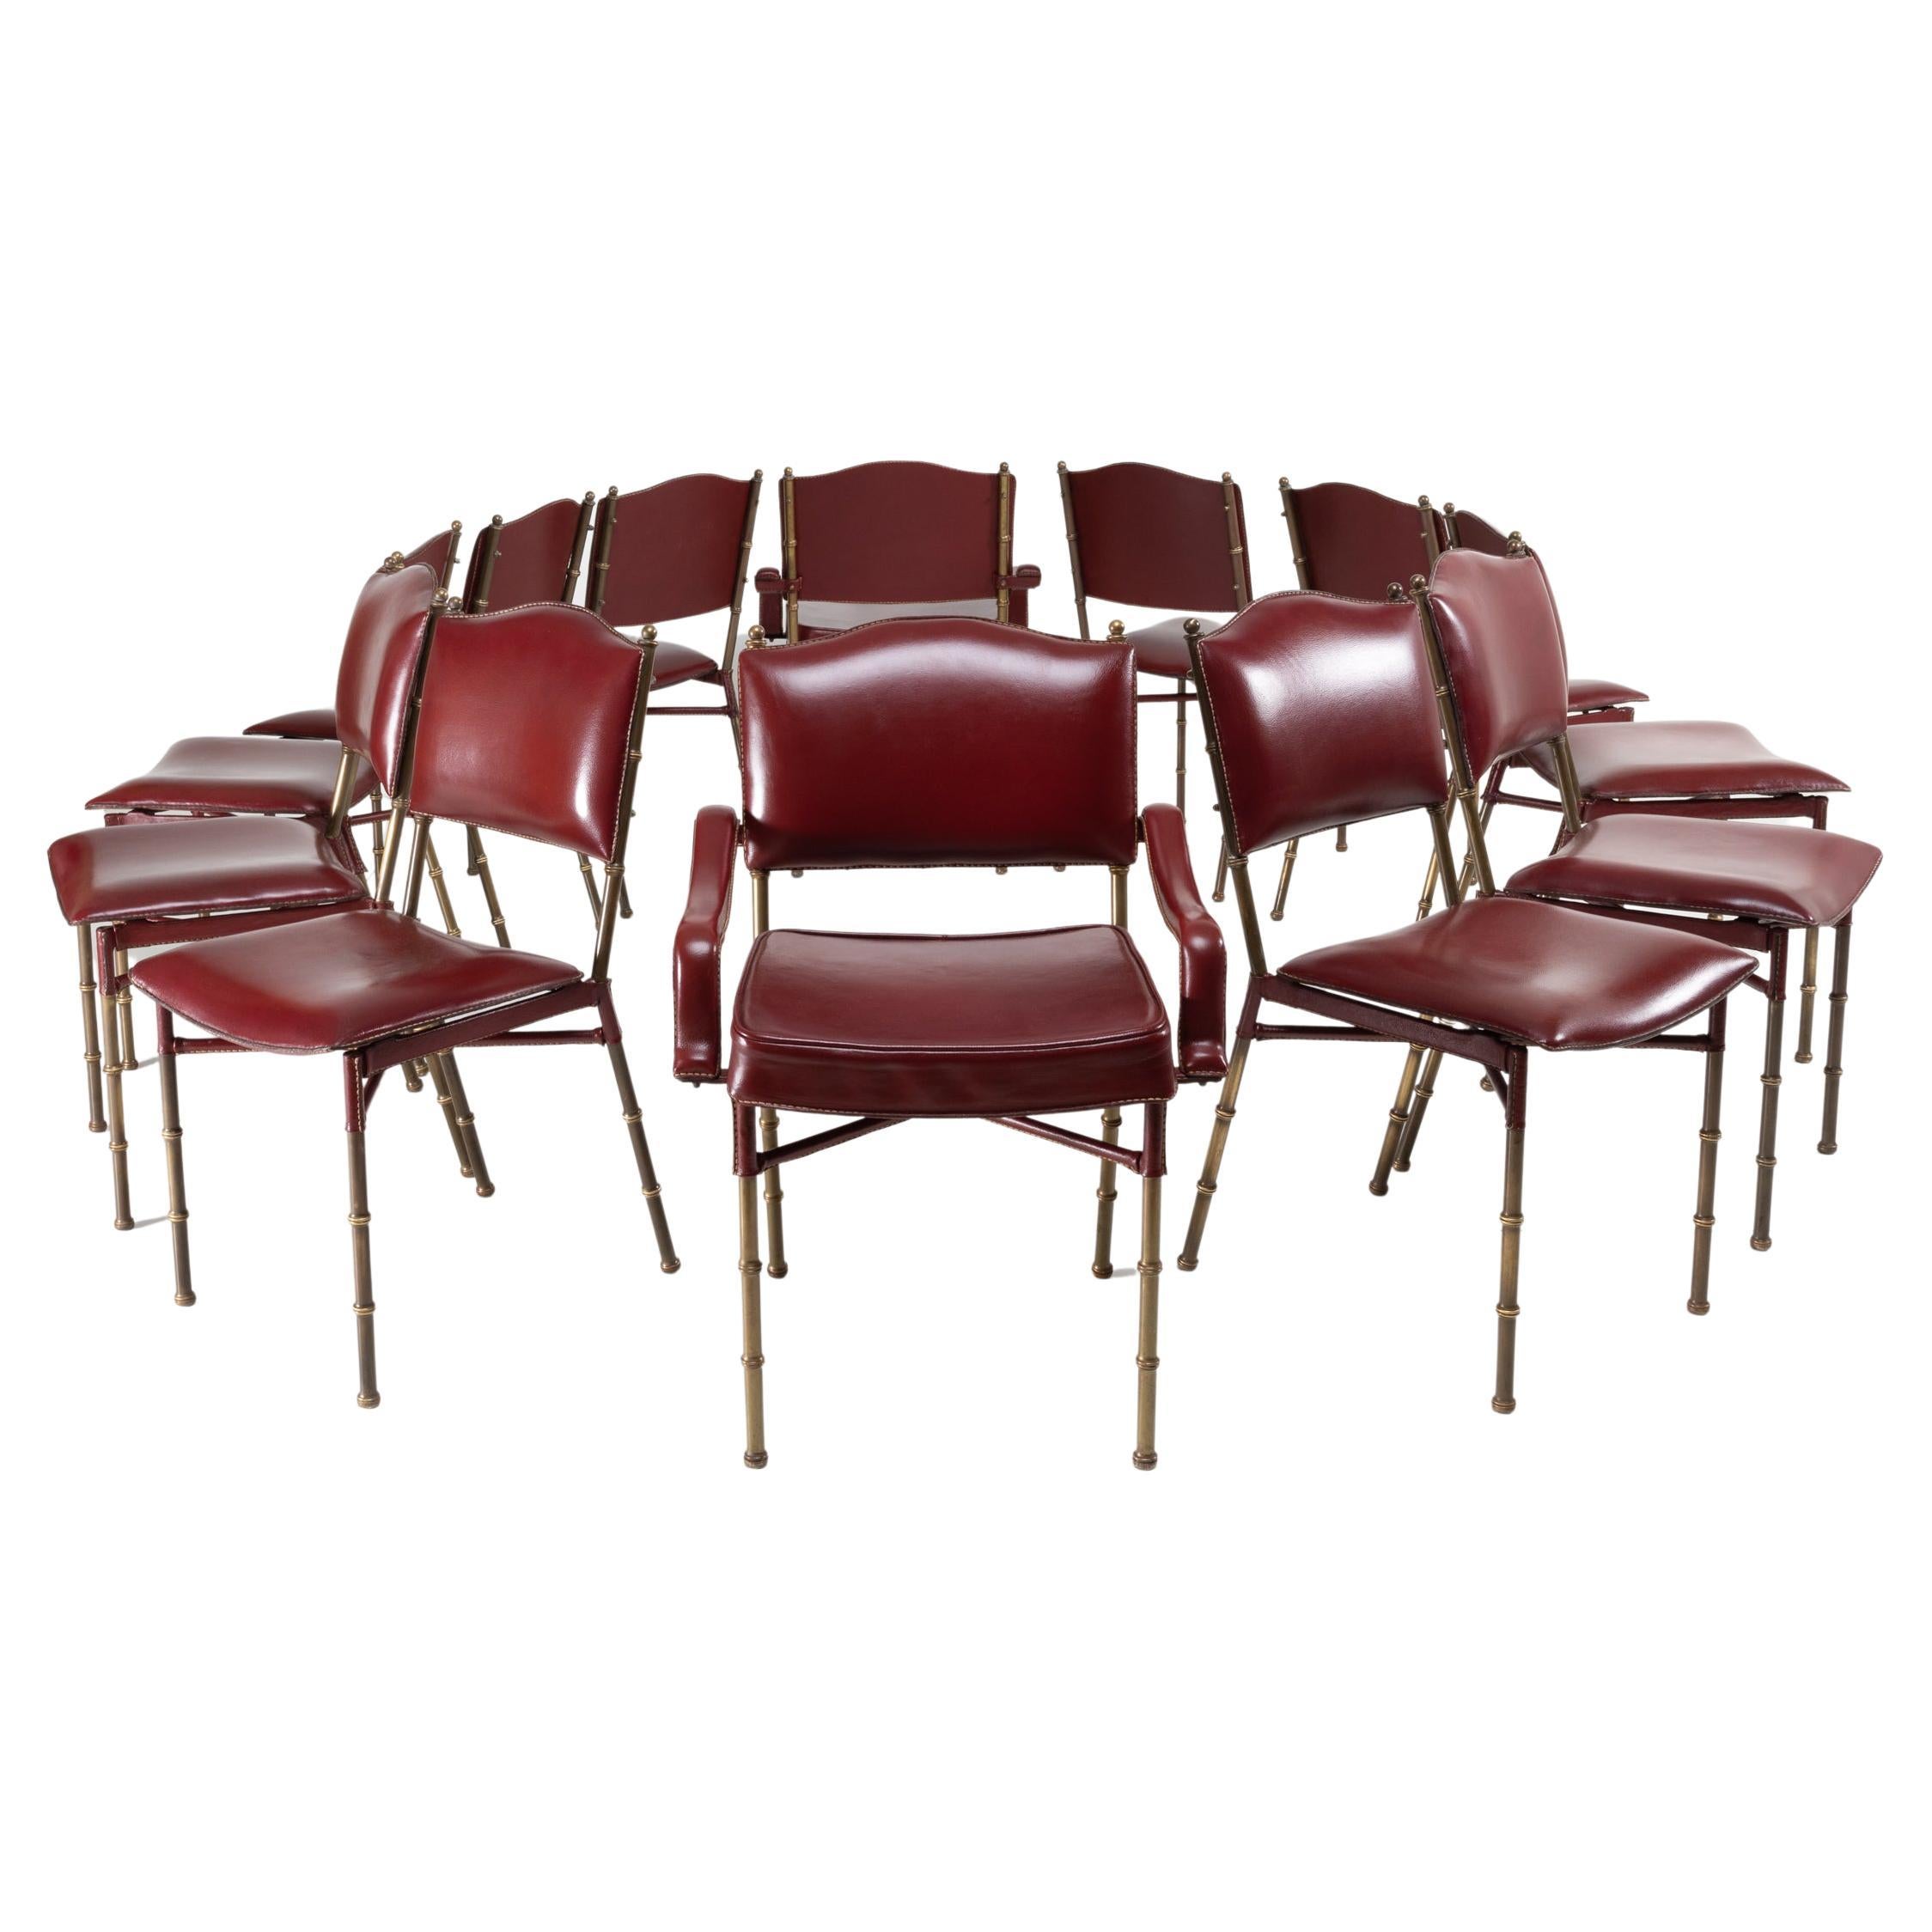 Set of 12 Saddle Stitched Red Leather Chairs by Jacques Adnet, France